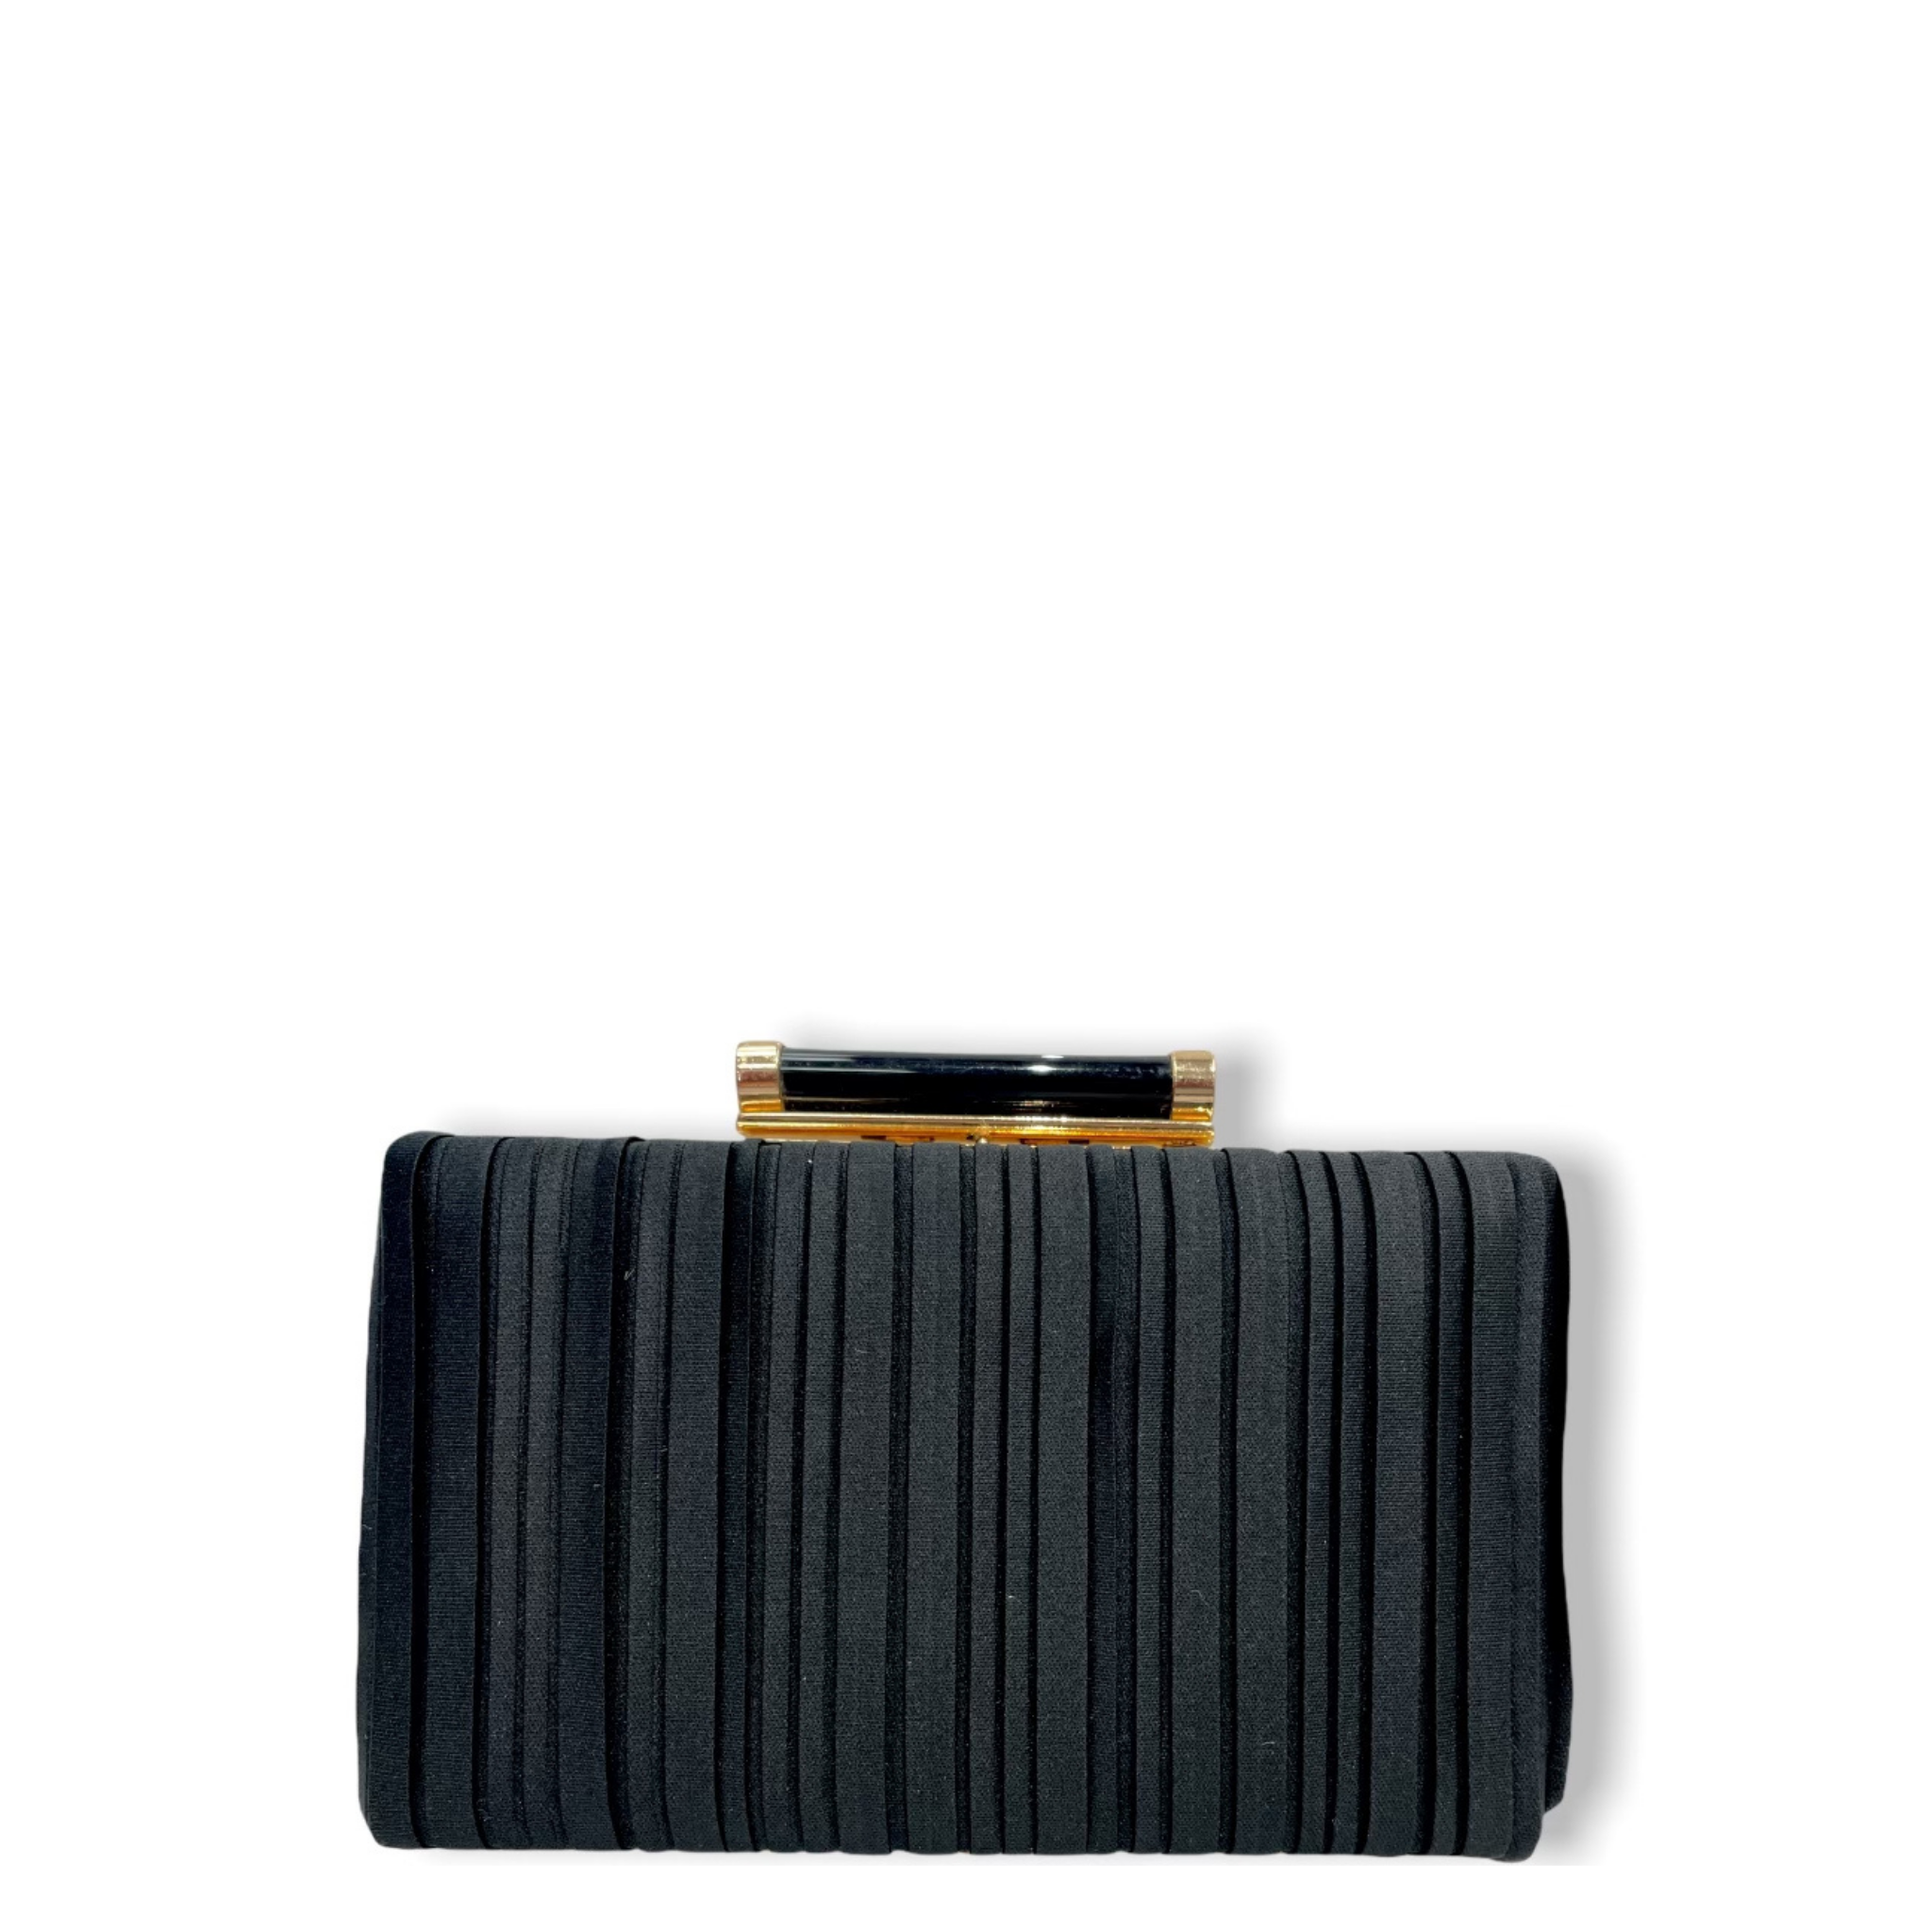 Pleated Soft Nappa Clutch with Lucite Clasp